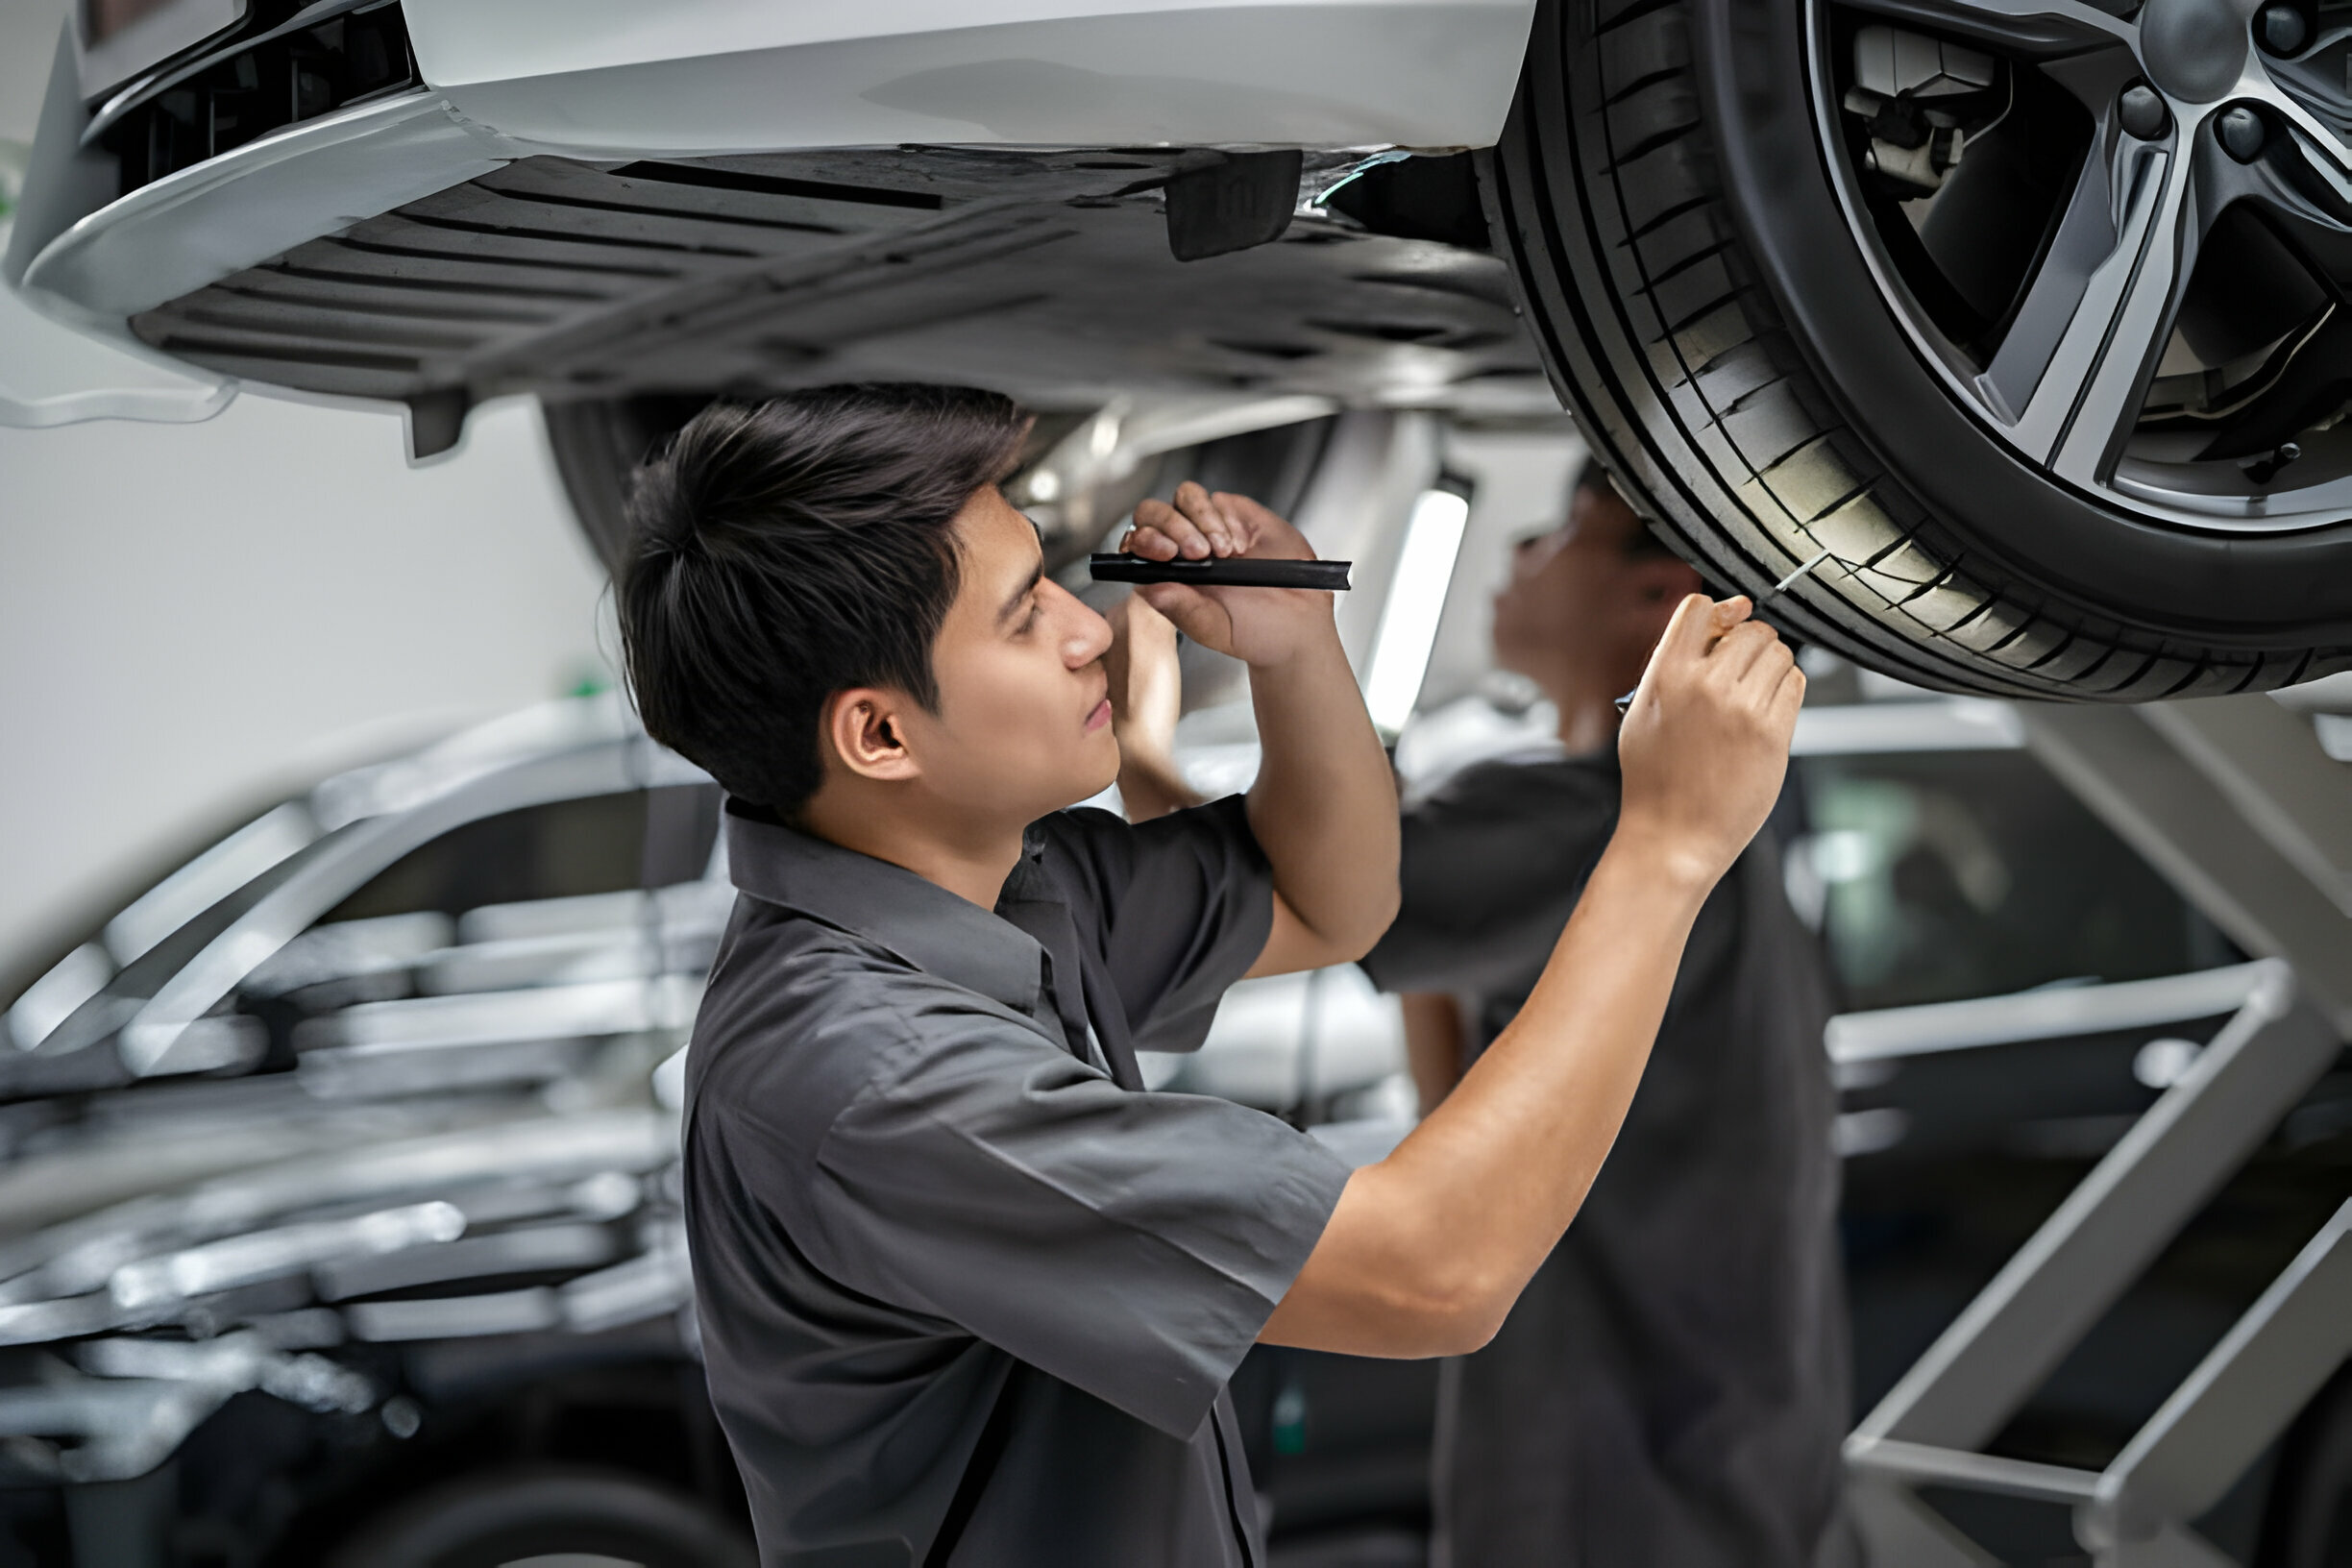 Tire Safety Inspections: When and Why You Need Them